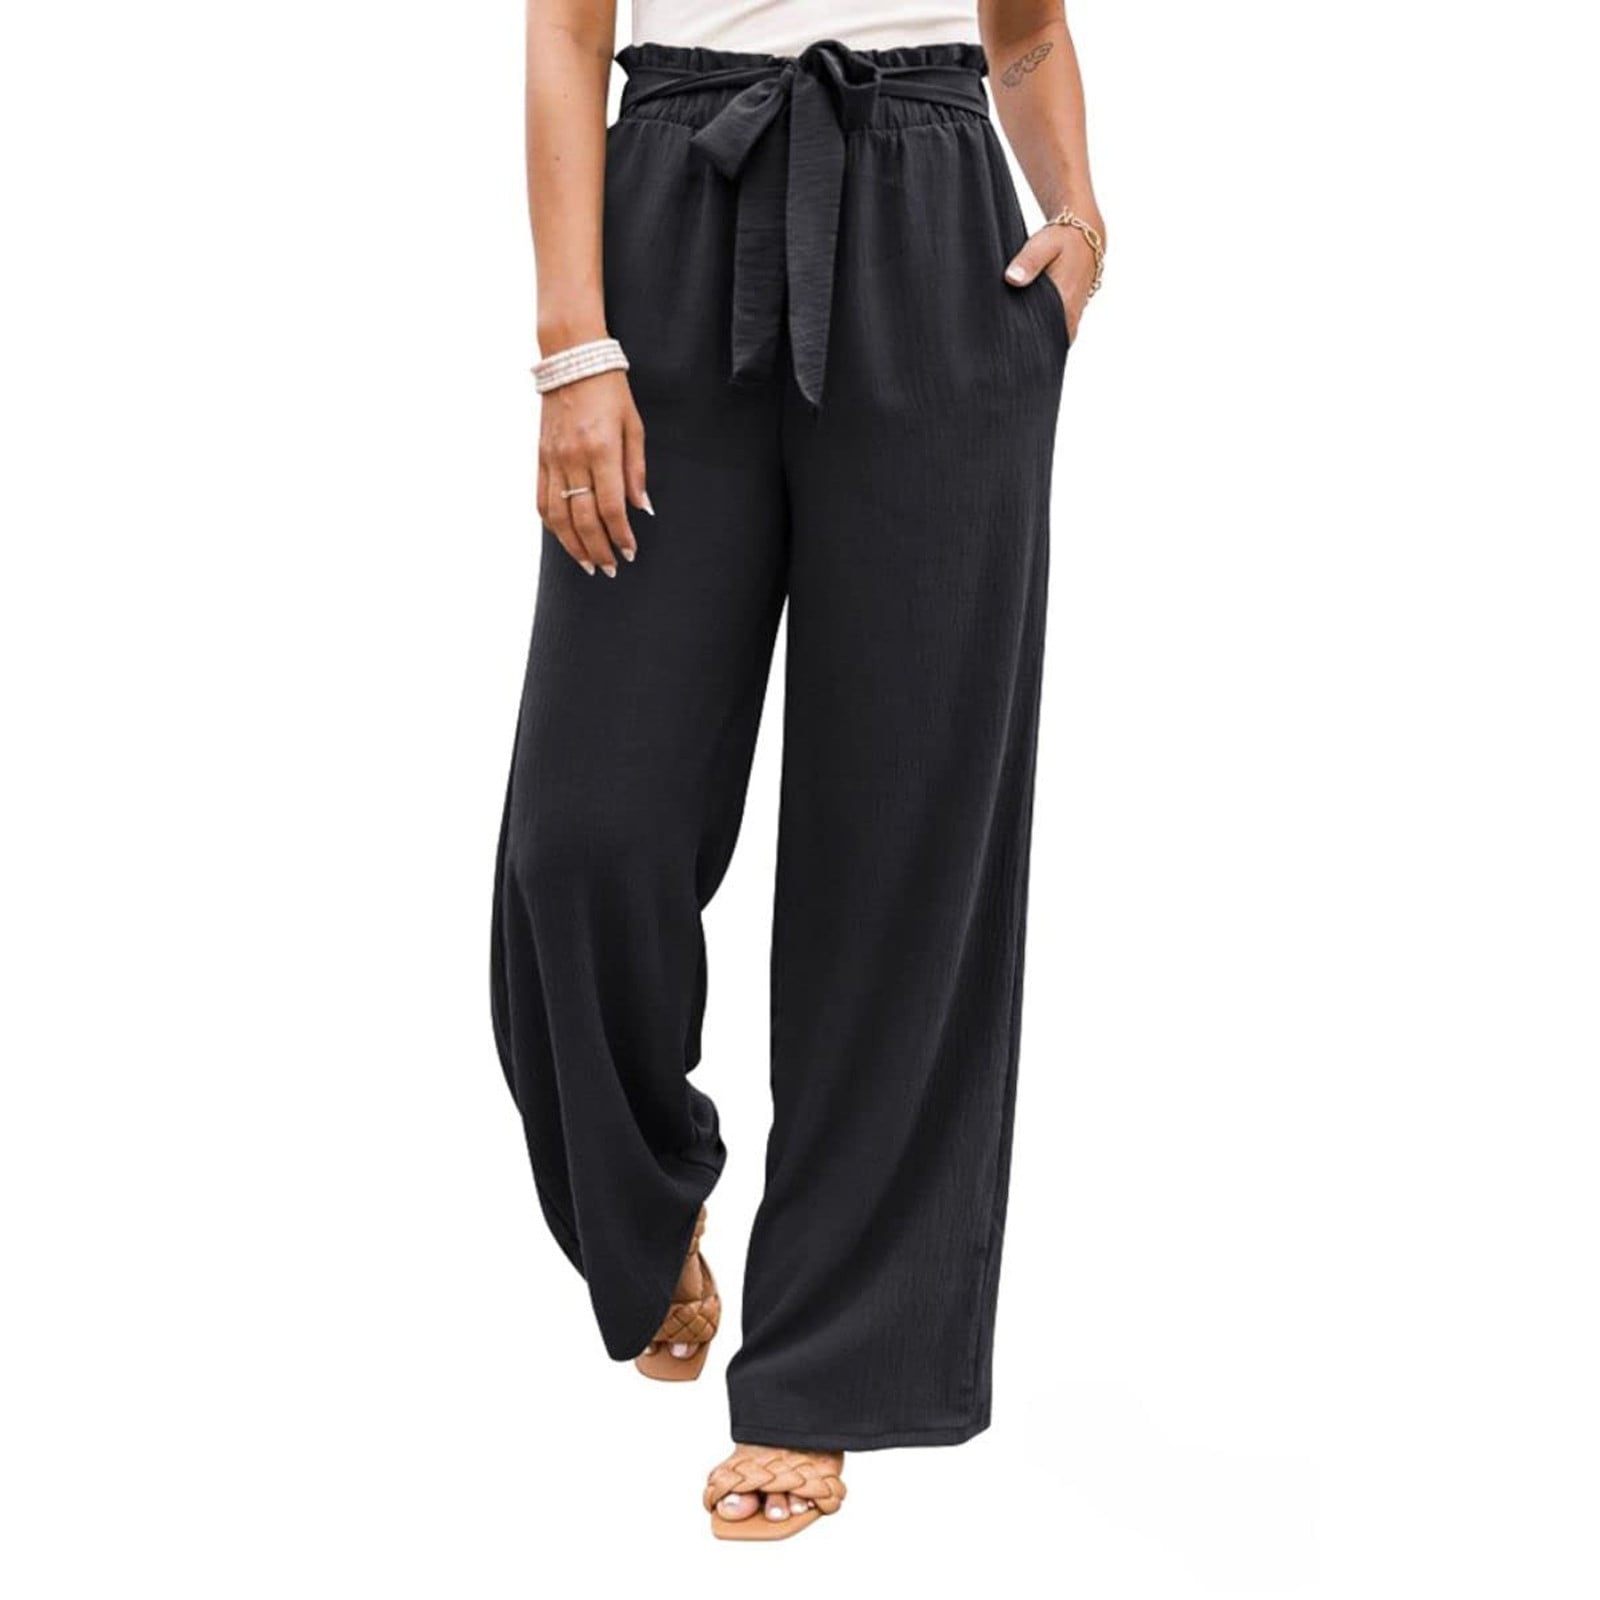 Wide Leg Pants for Women, Women'S Elastic High Waist Solid Color Casual  Loose Long Pants with Pockets  Sales And Deals Clearance Items Under  15 Dollars #4 